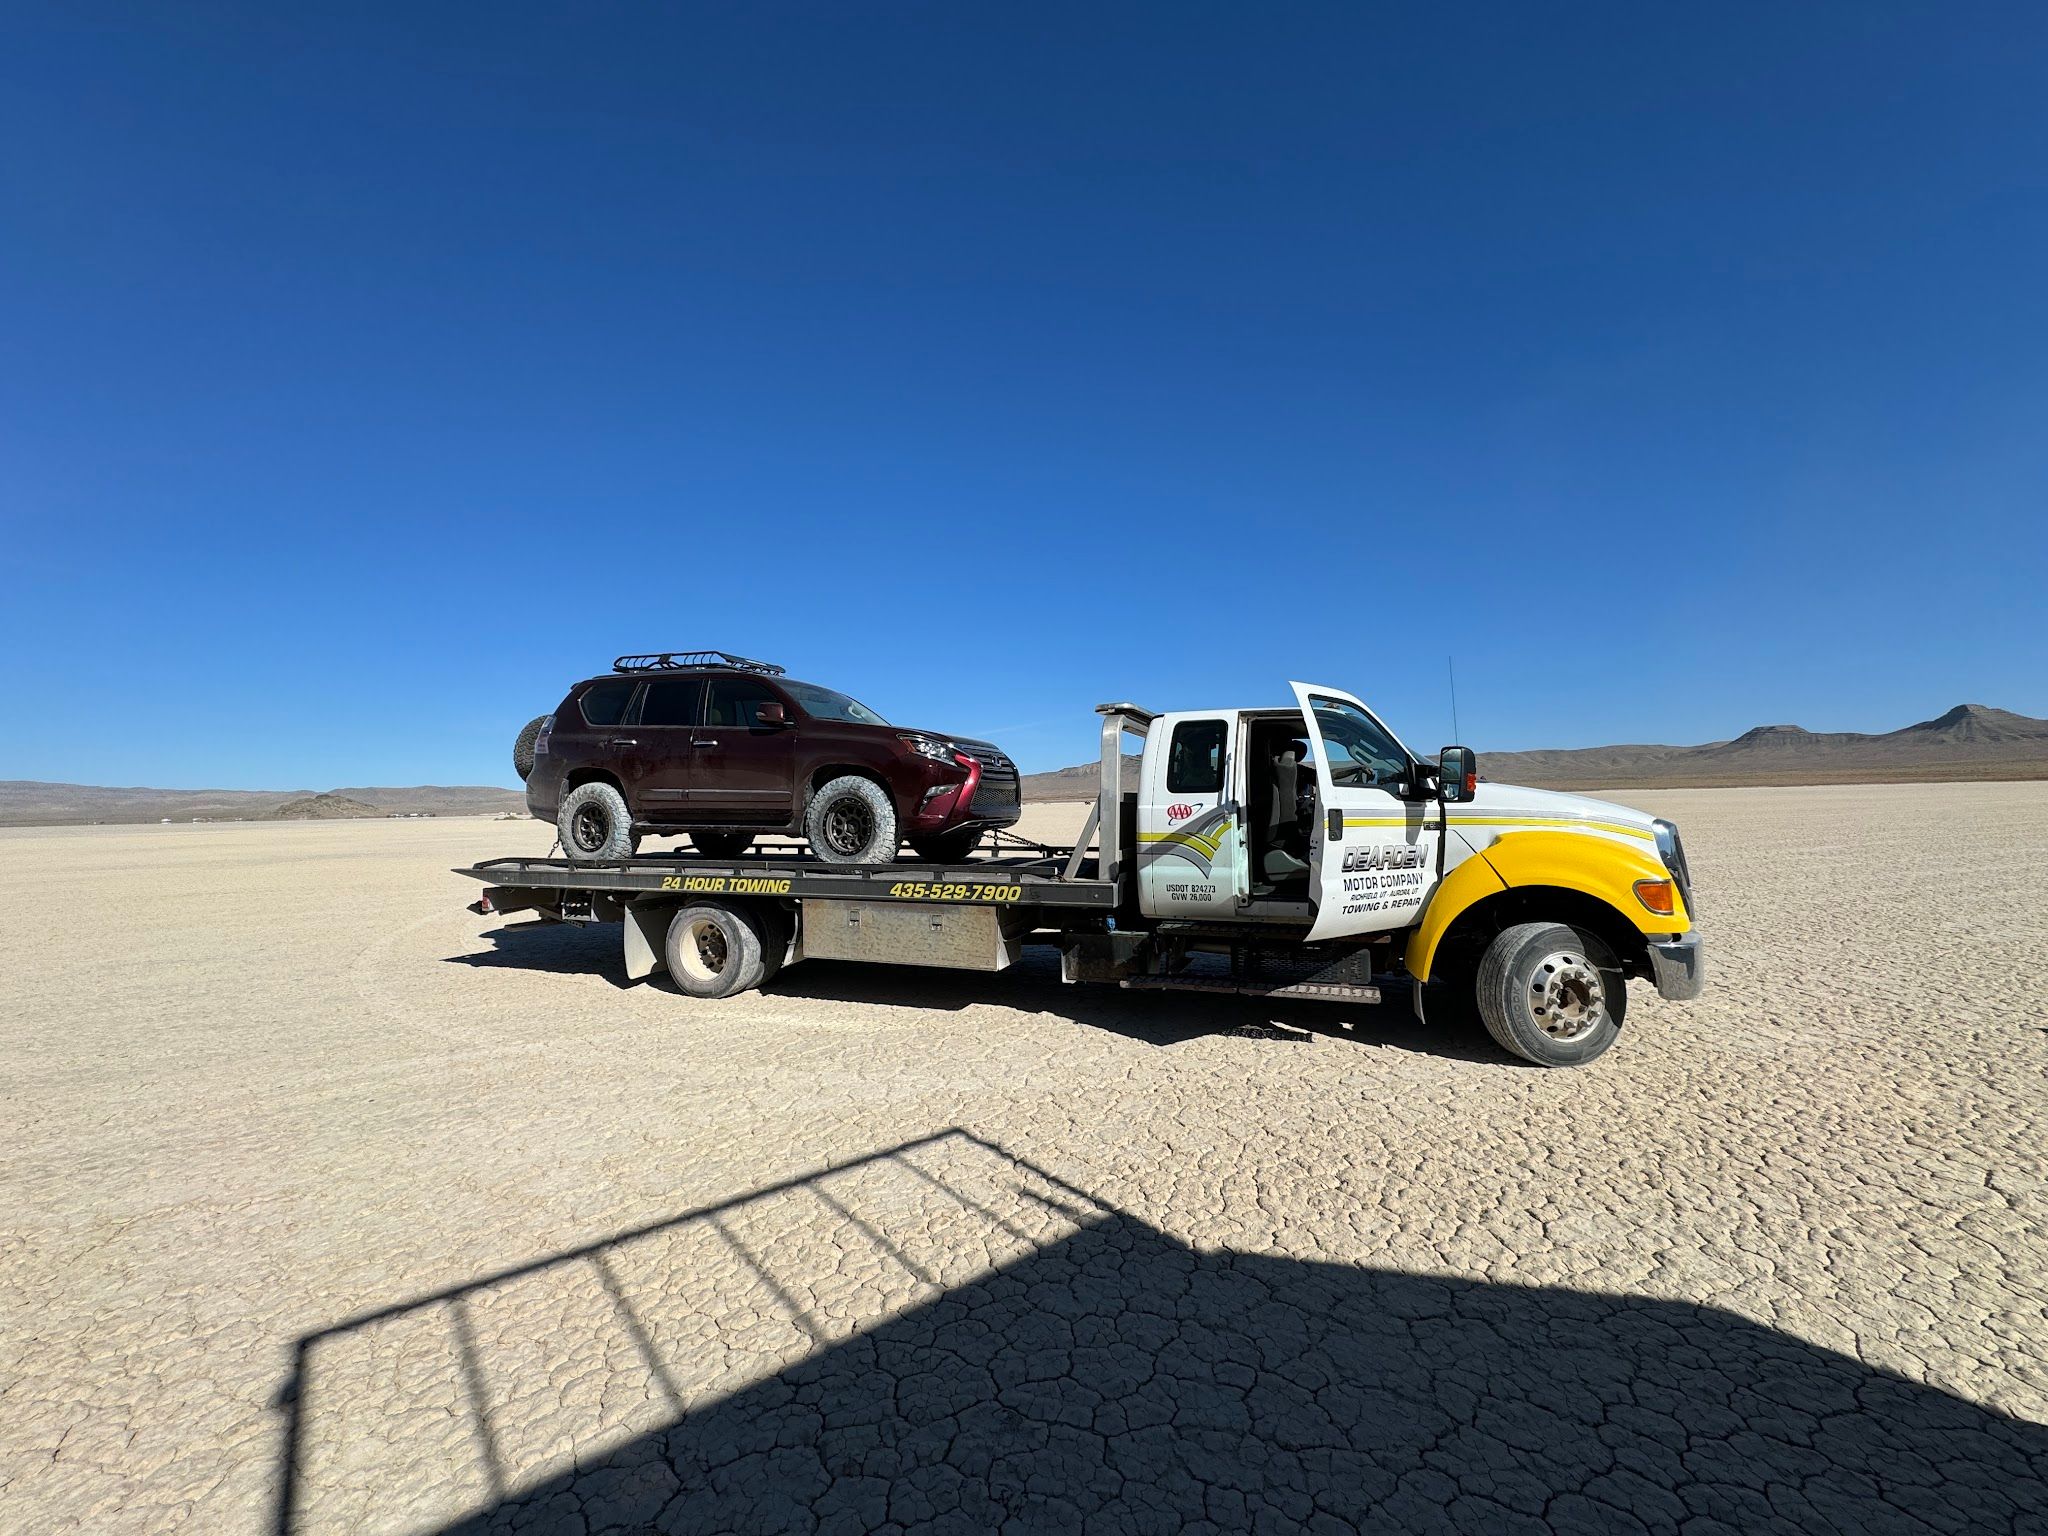 Dearden Towing and Auto Repair